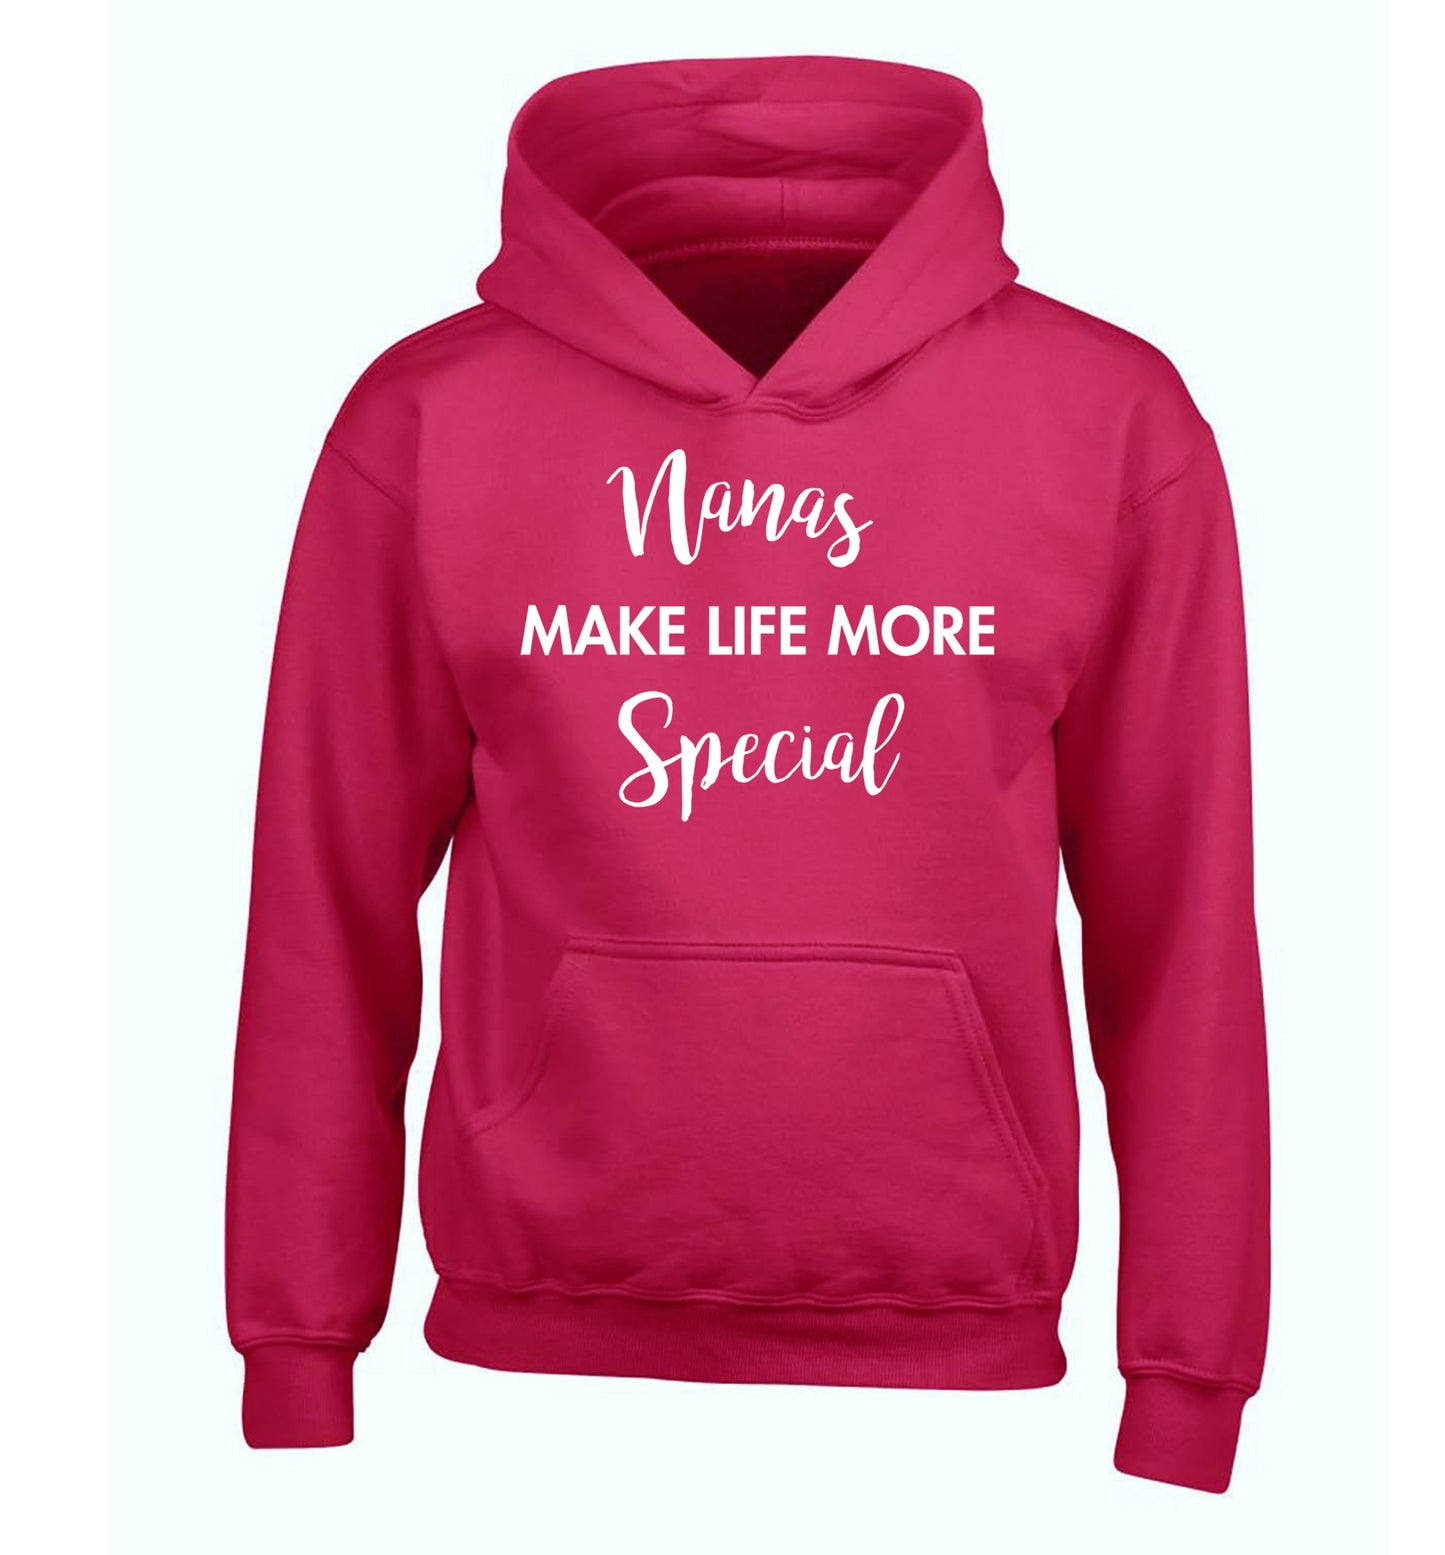 Nanas make life more special children's pink hoodie 12-14 Years